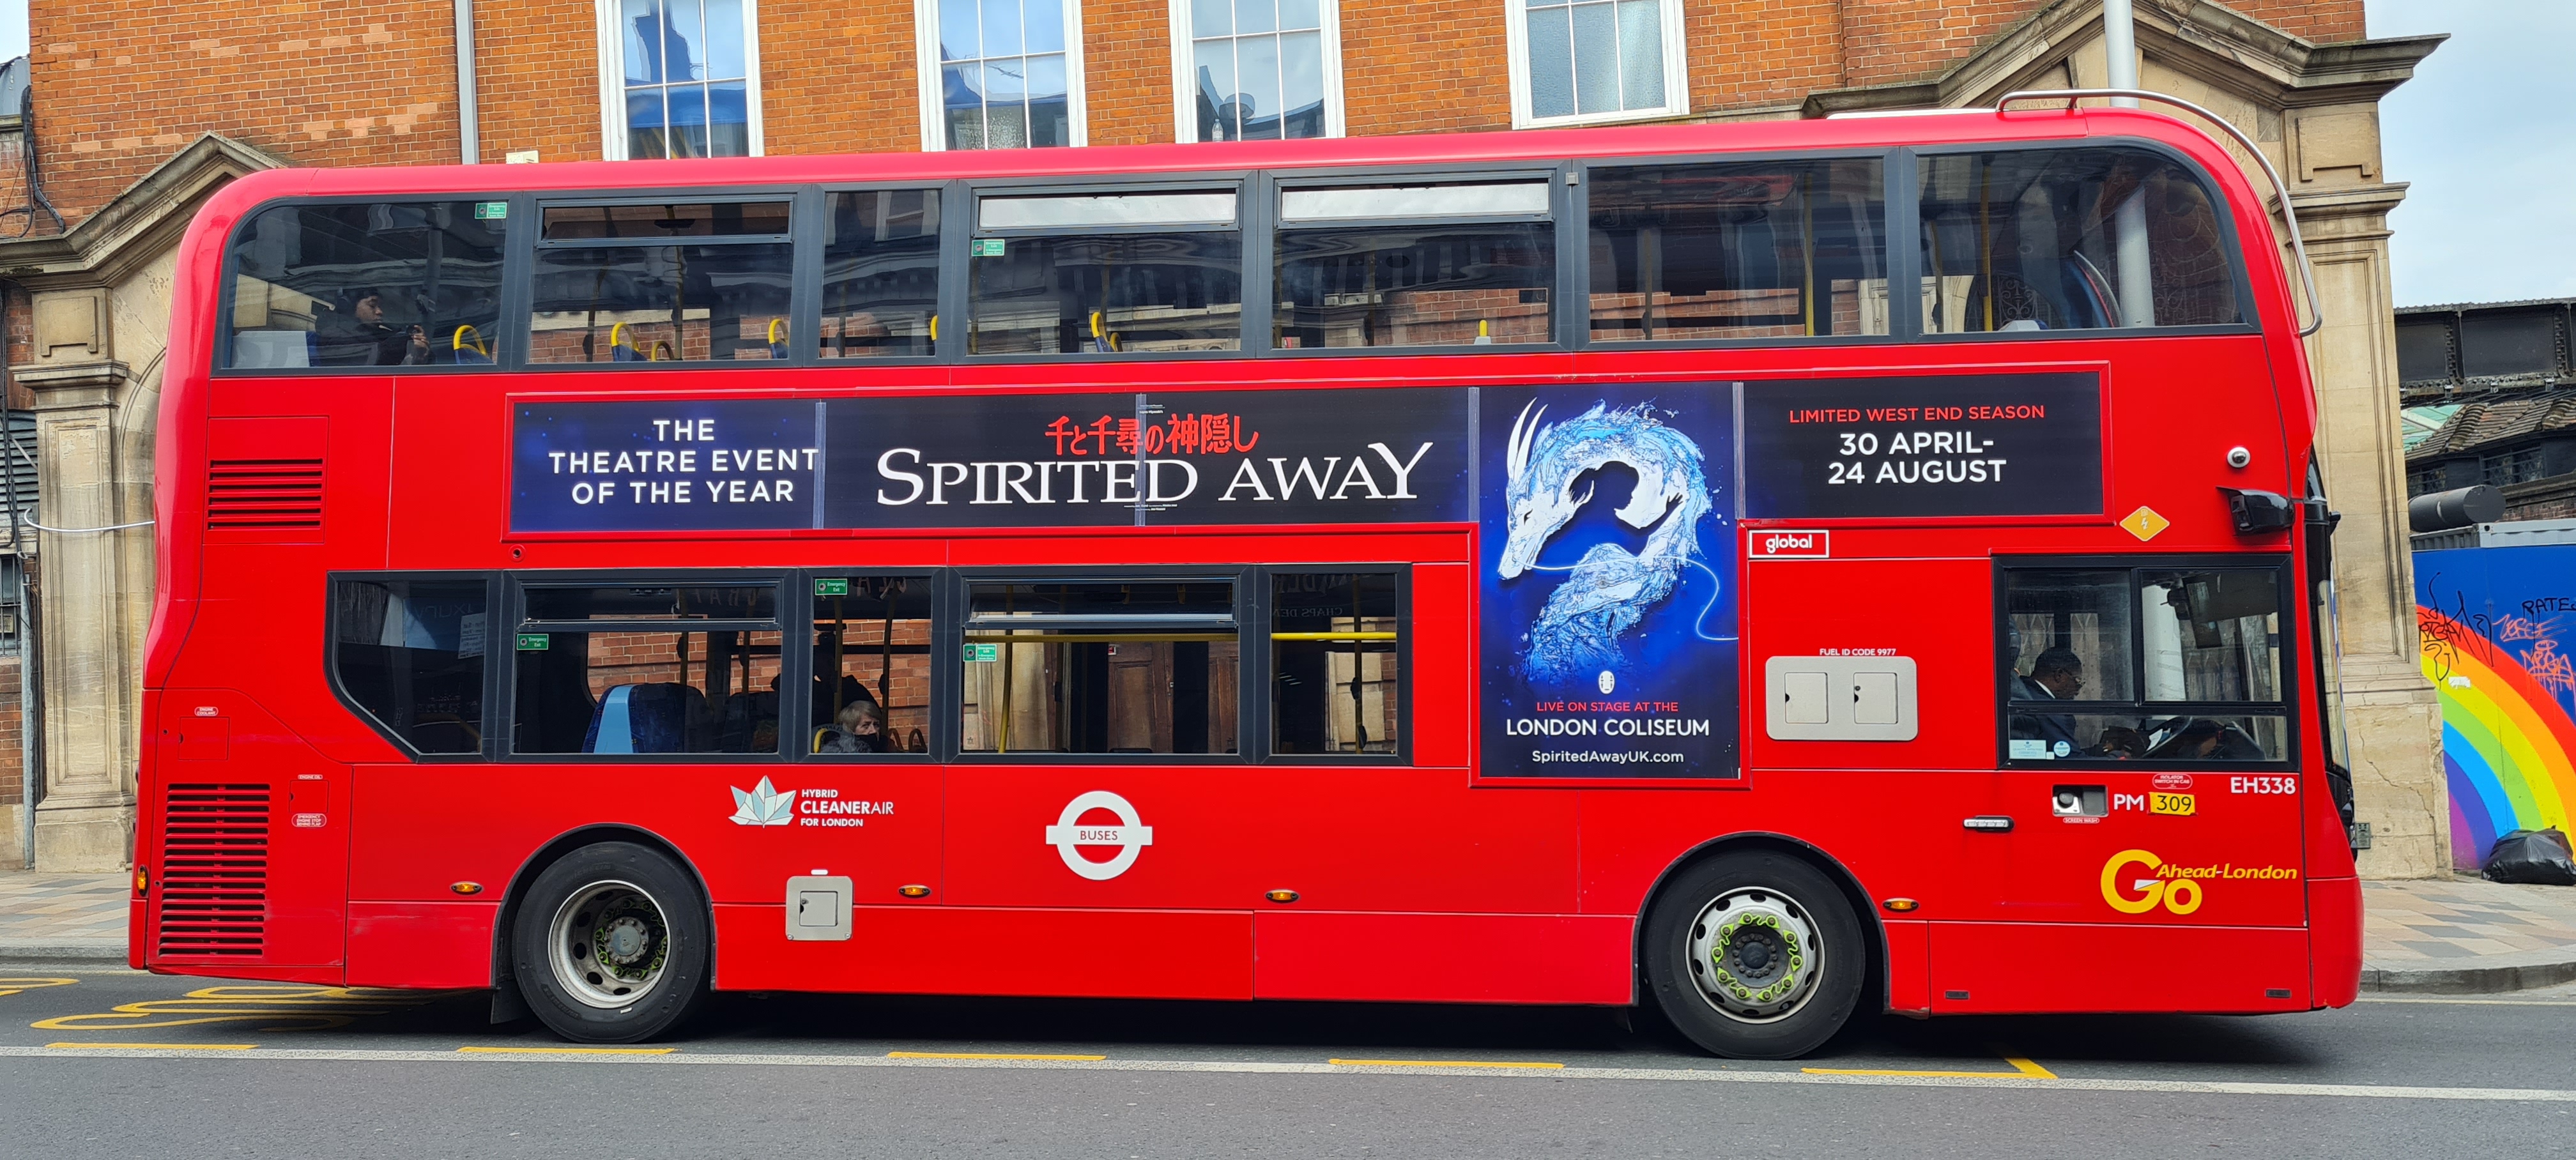 Bus promoting the West End adaptation of Spirited Away